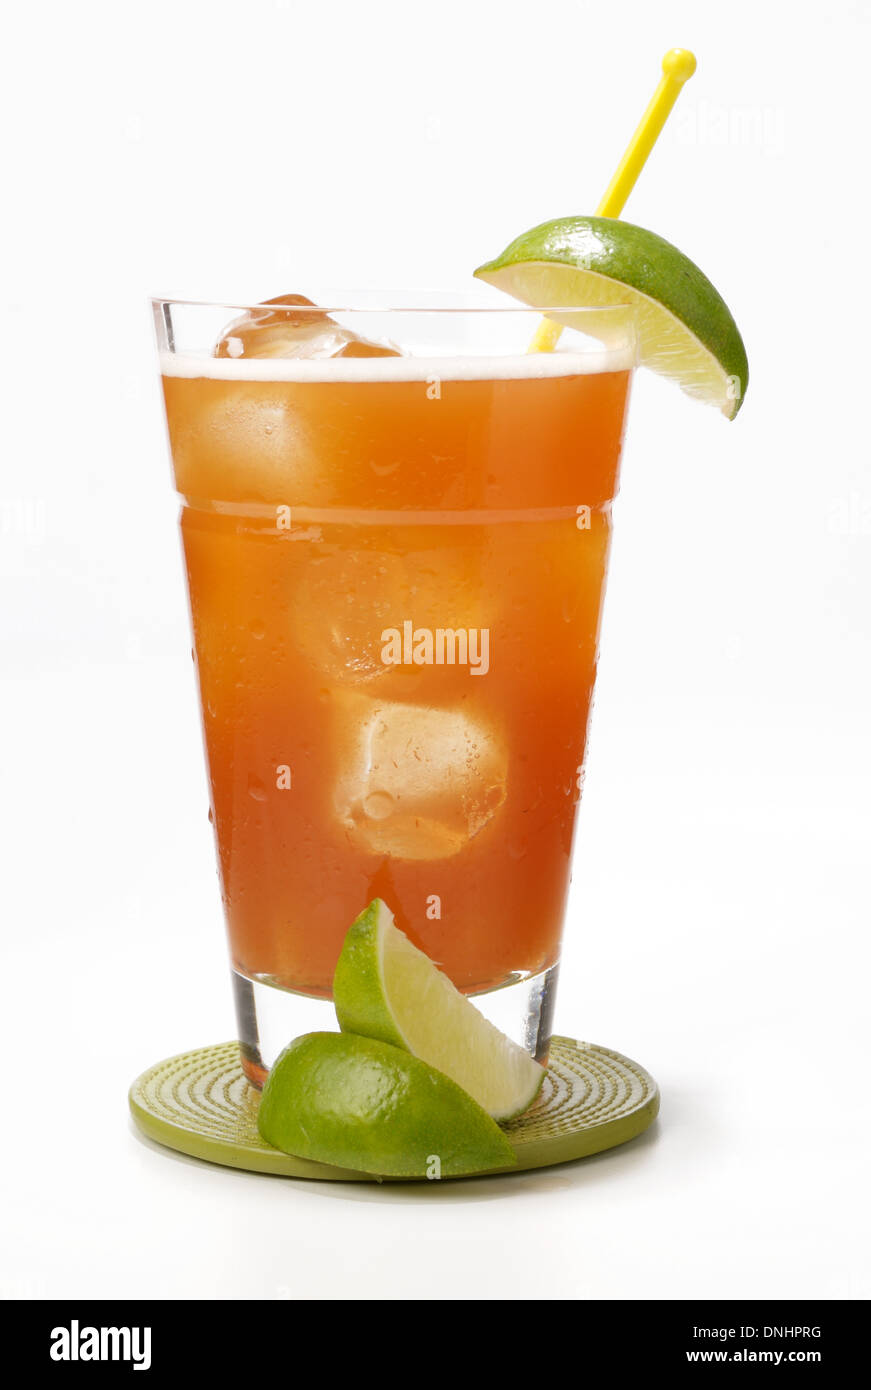 A orange cocktail drink in a glass with a green lime wedges as garnish. Stock Photo